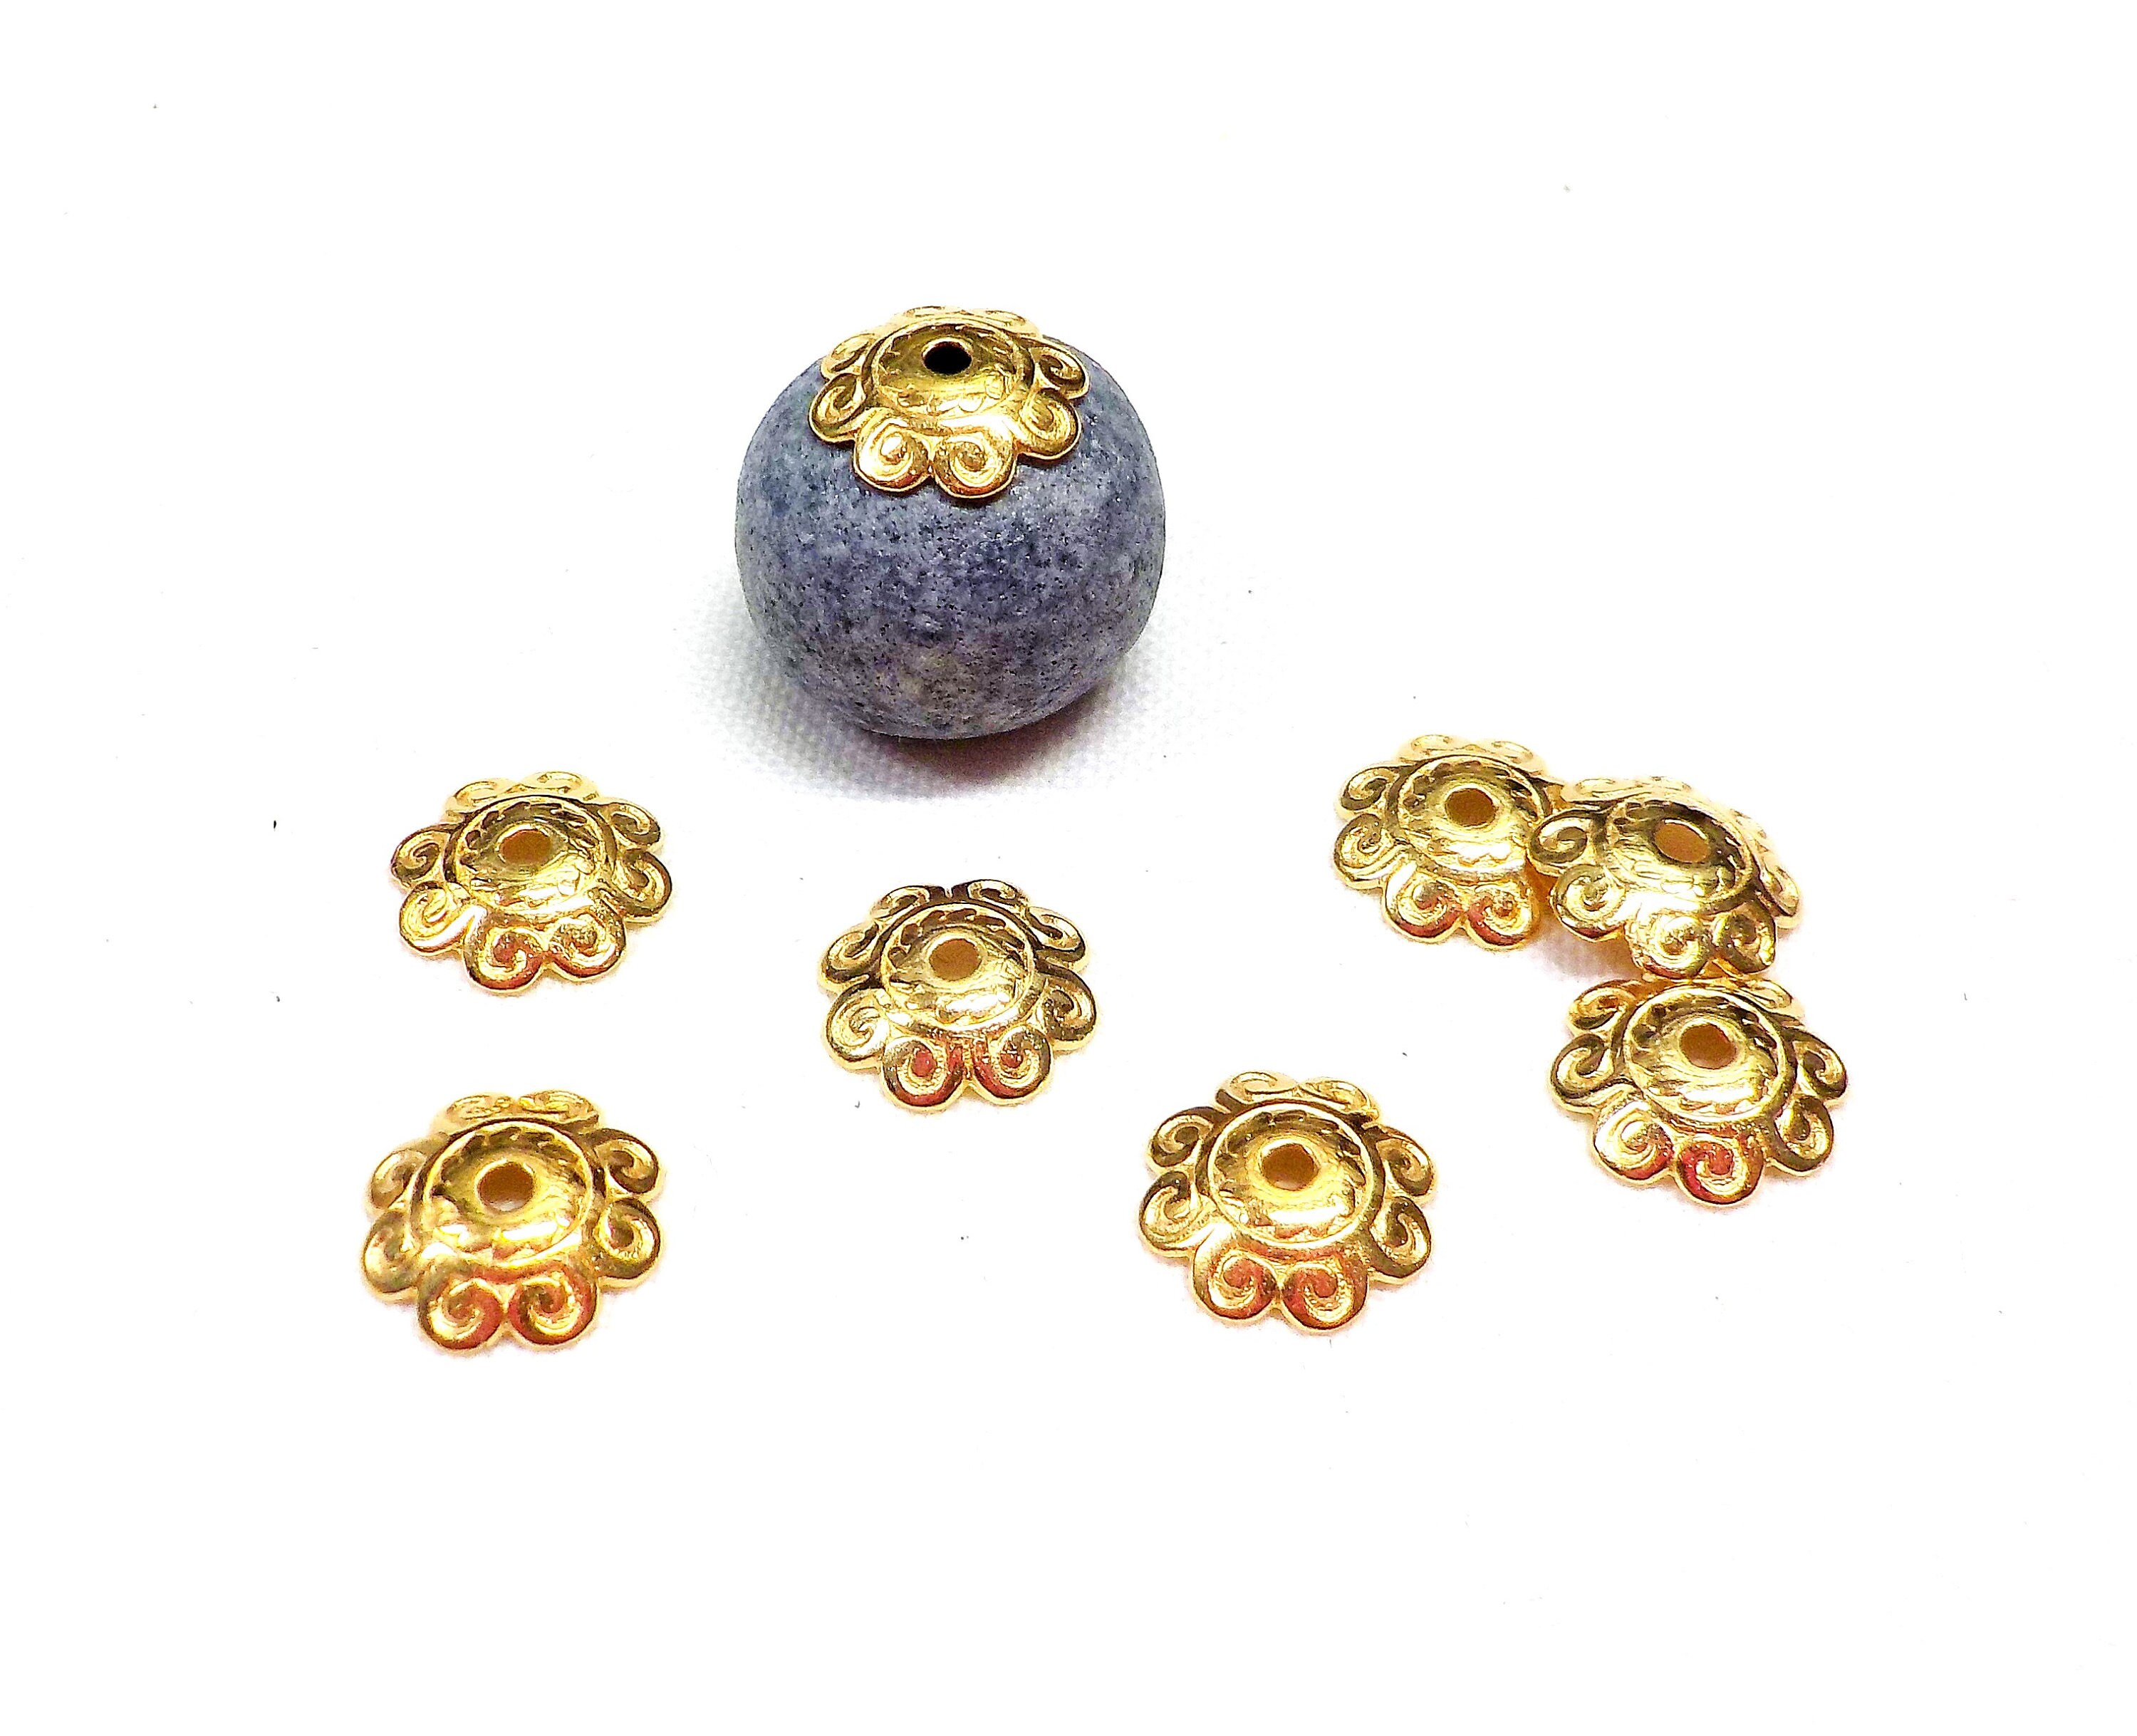 Small Golden Bead Caps, Caps for Jewelry Making, 8mm Bead Caps, End Caps  for Beads, Bali Style Granulated Bead Caps, 10 Pieces FD-30 